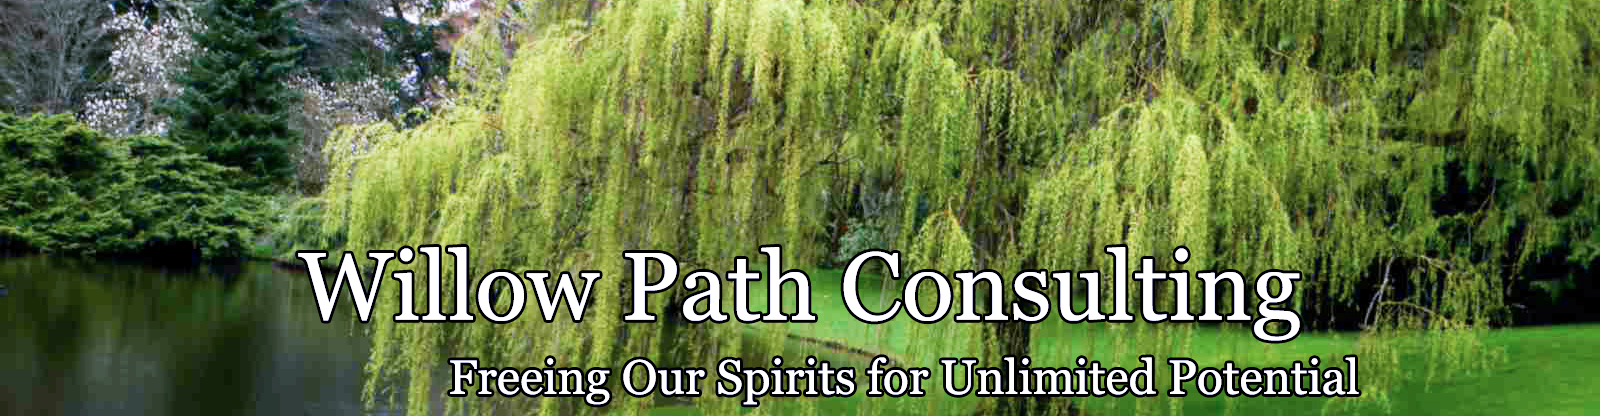 Willow Path Consulting